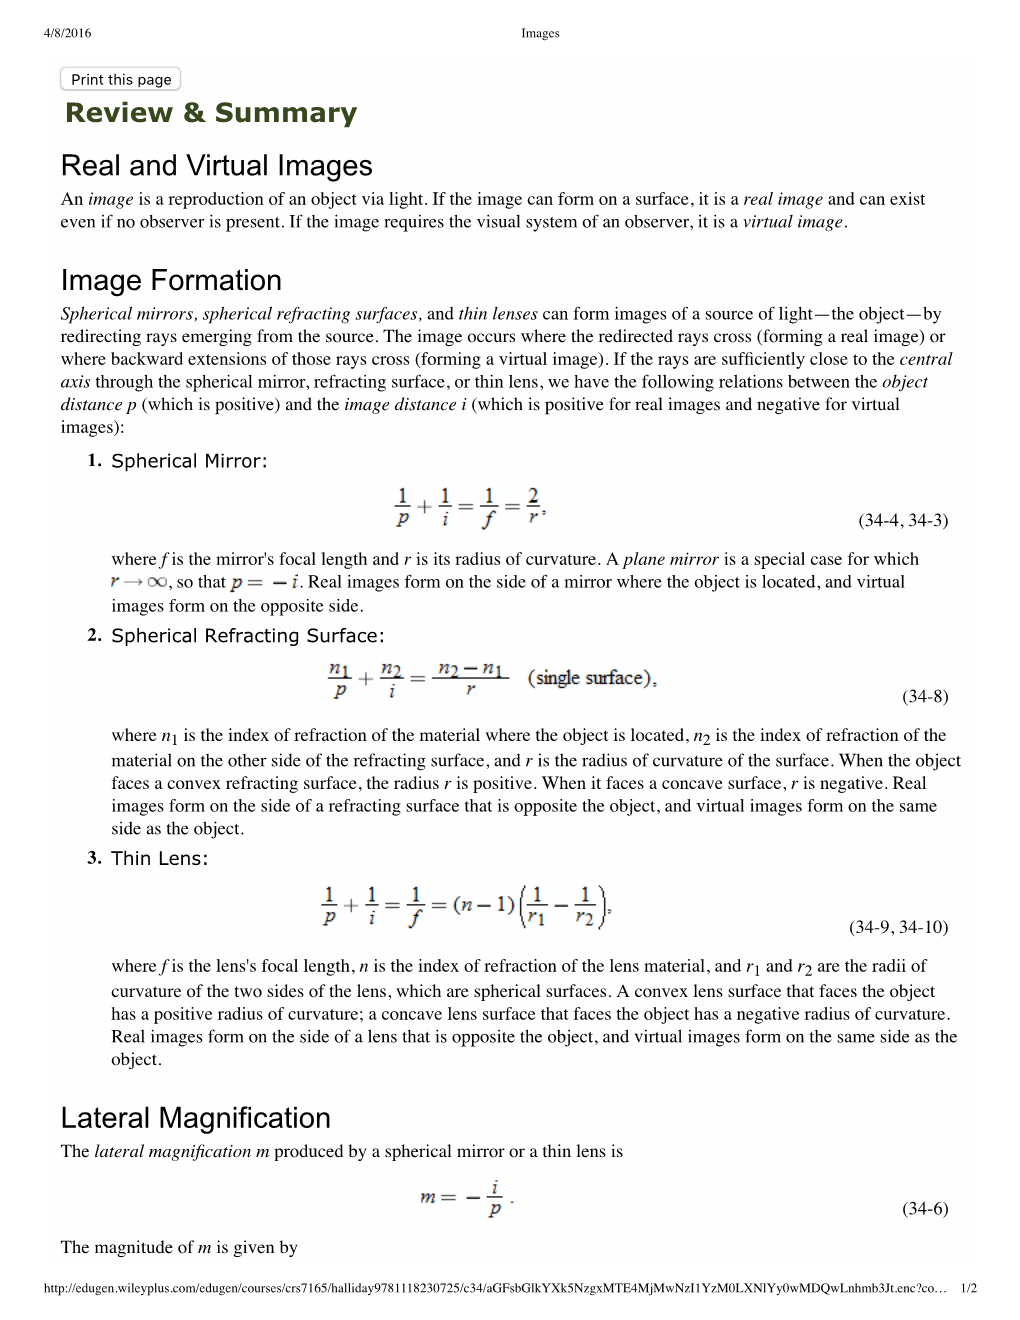 Real and Virtual Images Image Formation Lateral Magnification